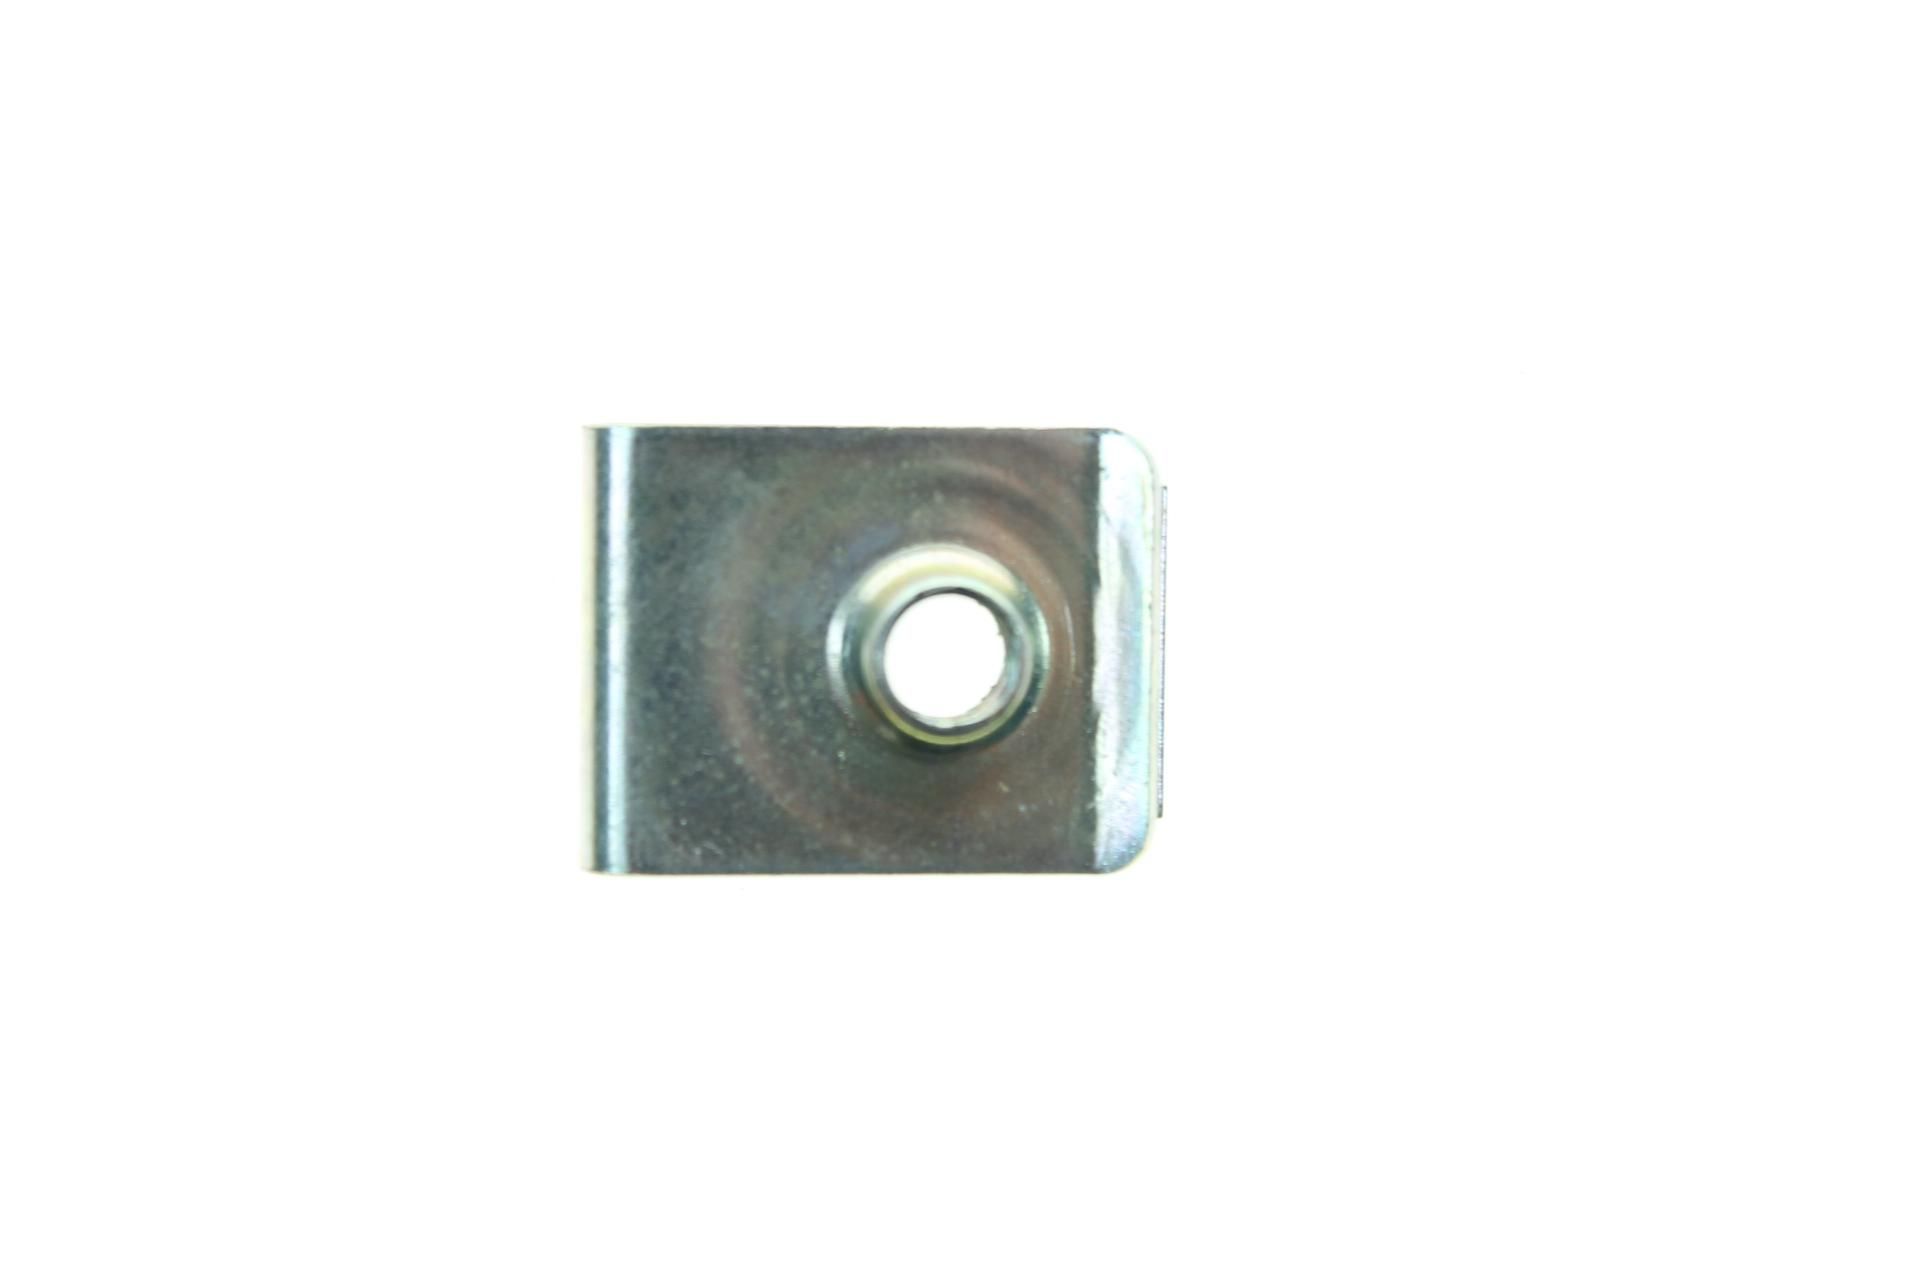 90183-05024-00 Superseded by 90183-051A0-00 - NUT, SPRING